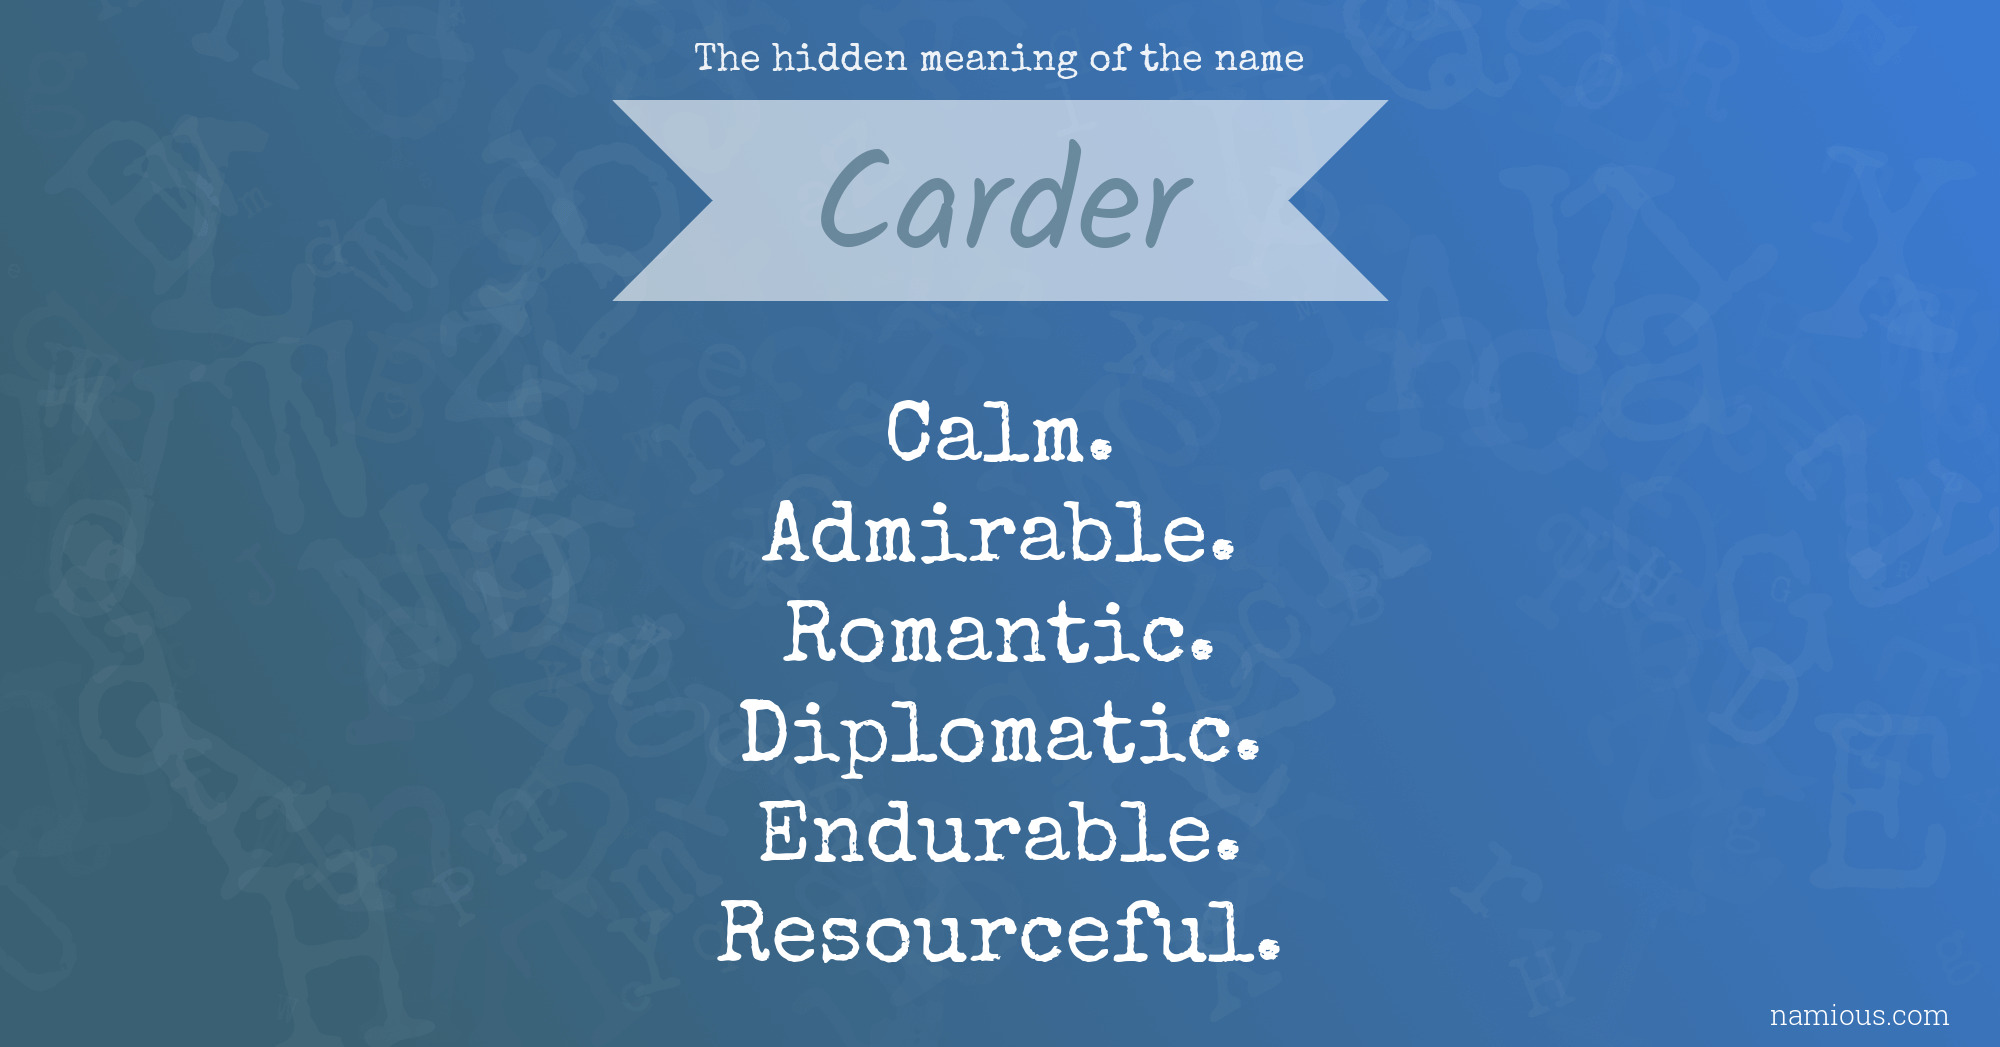 The hidden meaning of the name Carder